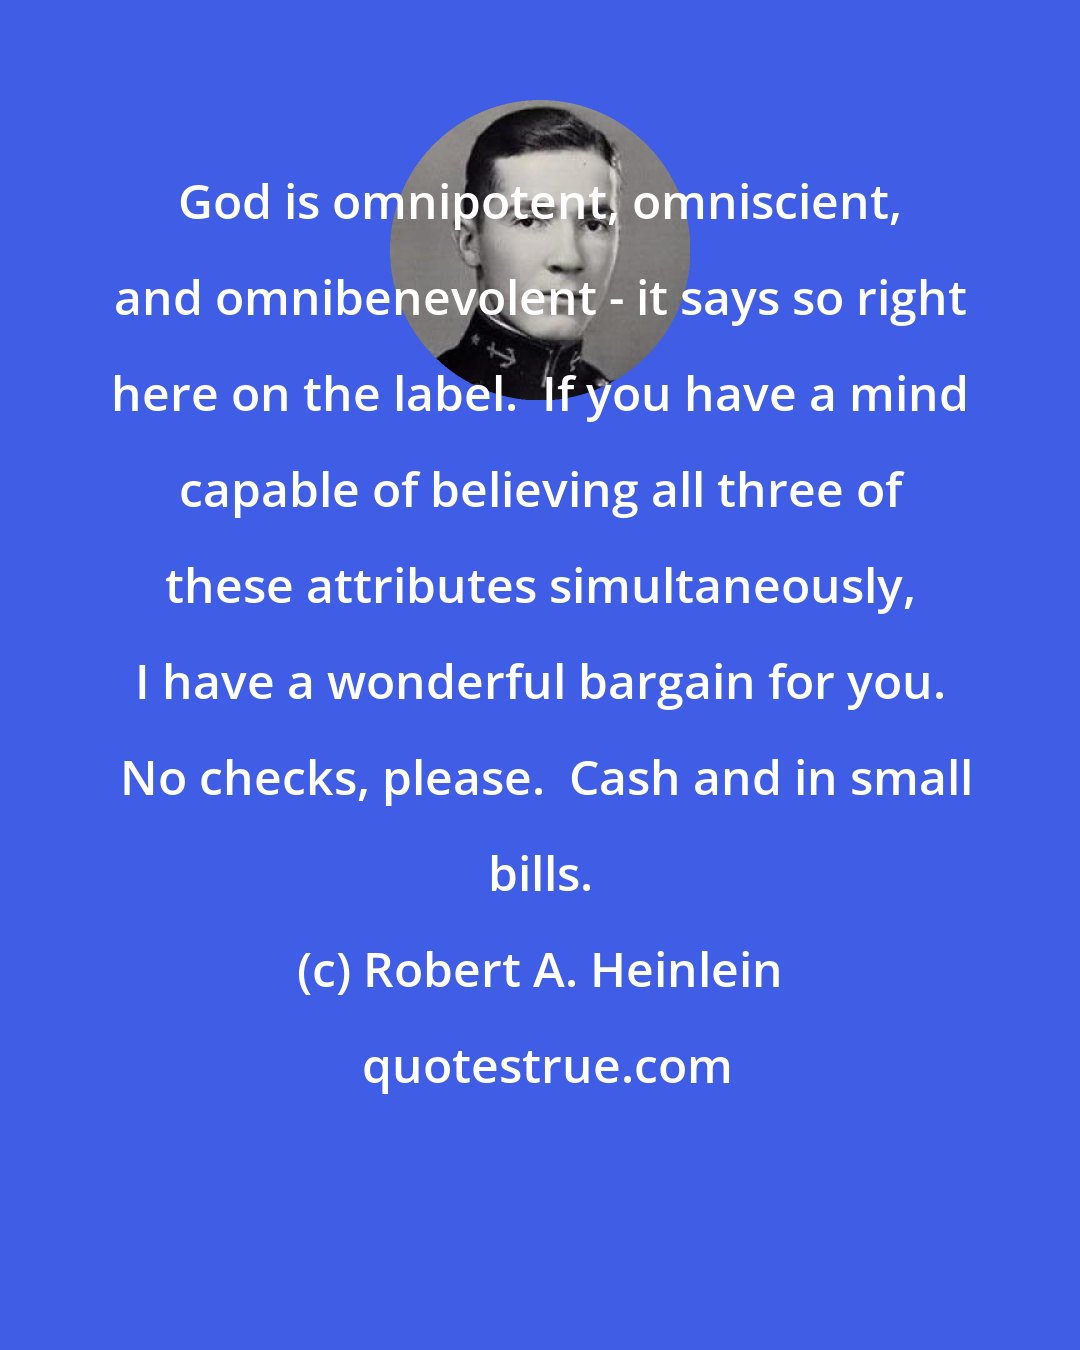 Robert A. Heinlein: God is omnipotent, omniscient, and omnibenevolent - it says so right here on the label.  If you have a mind capable of believing all three of these attributes simultaneously, I have a wonderful bargain for you.  No checks, please.  Cash and in small bills.